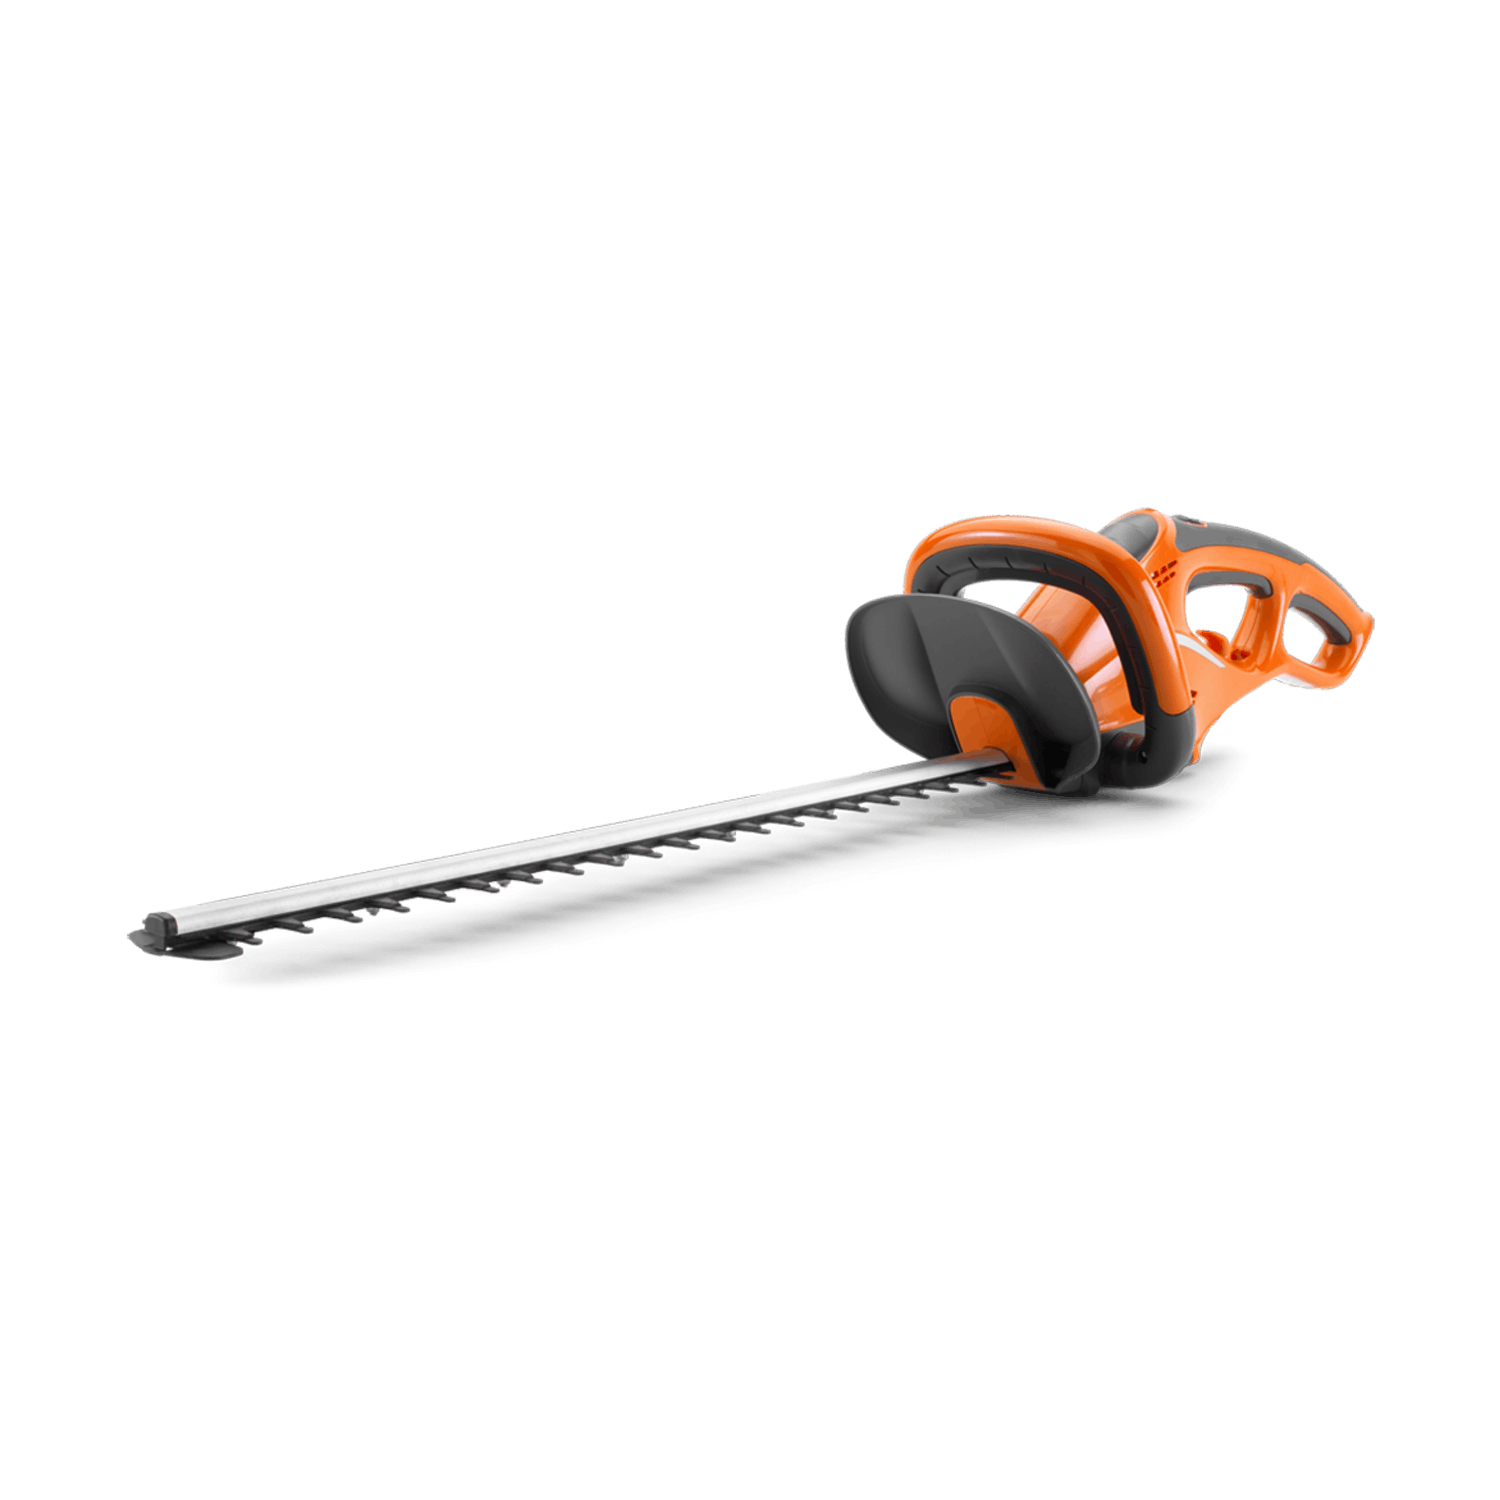 Image of You save &pound10.02: Flymo Easi Cut 610XT Corded Hedge Trimmer
